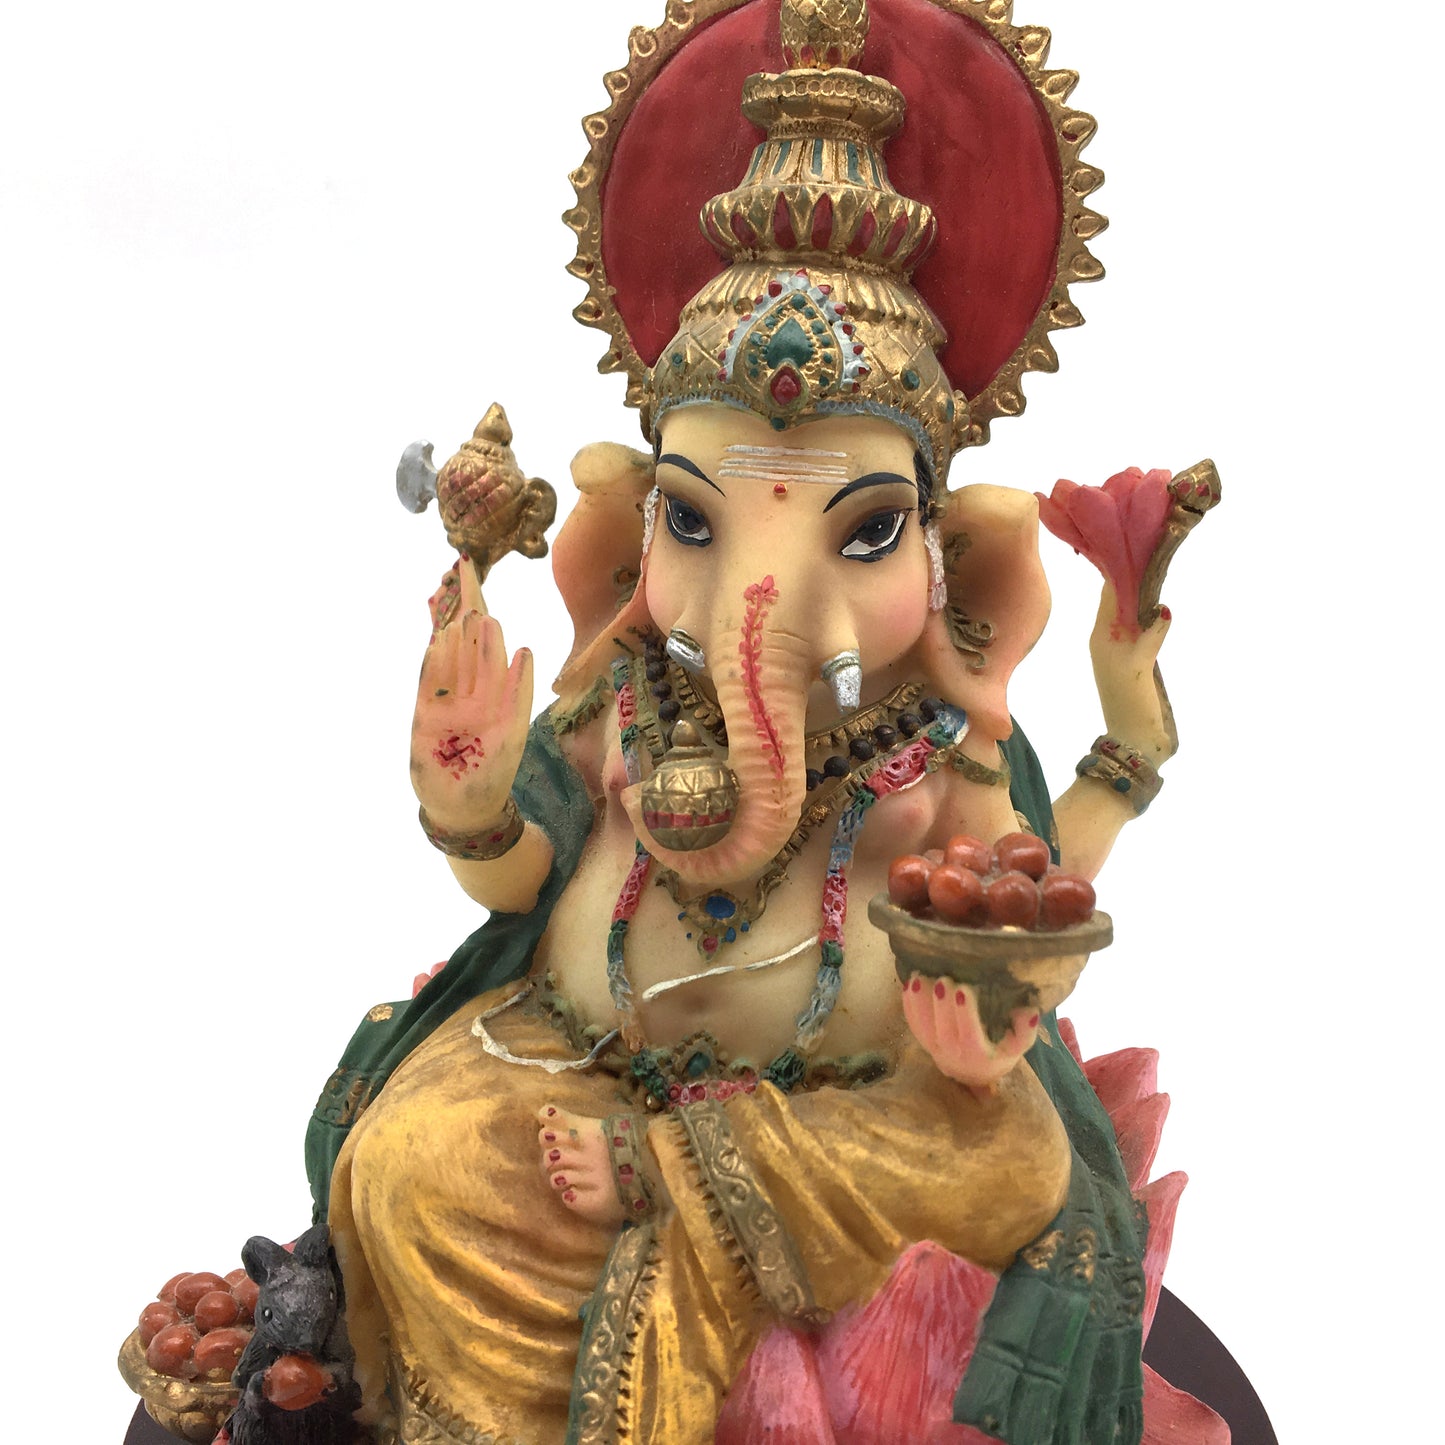 Ganesh Ganapati Hindu Elephant God Remover of Obstacles Figurine Statue 7.5”